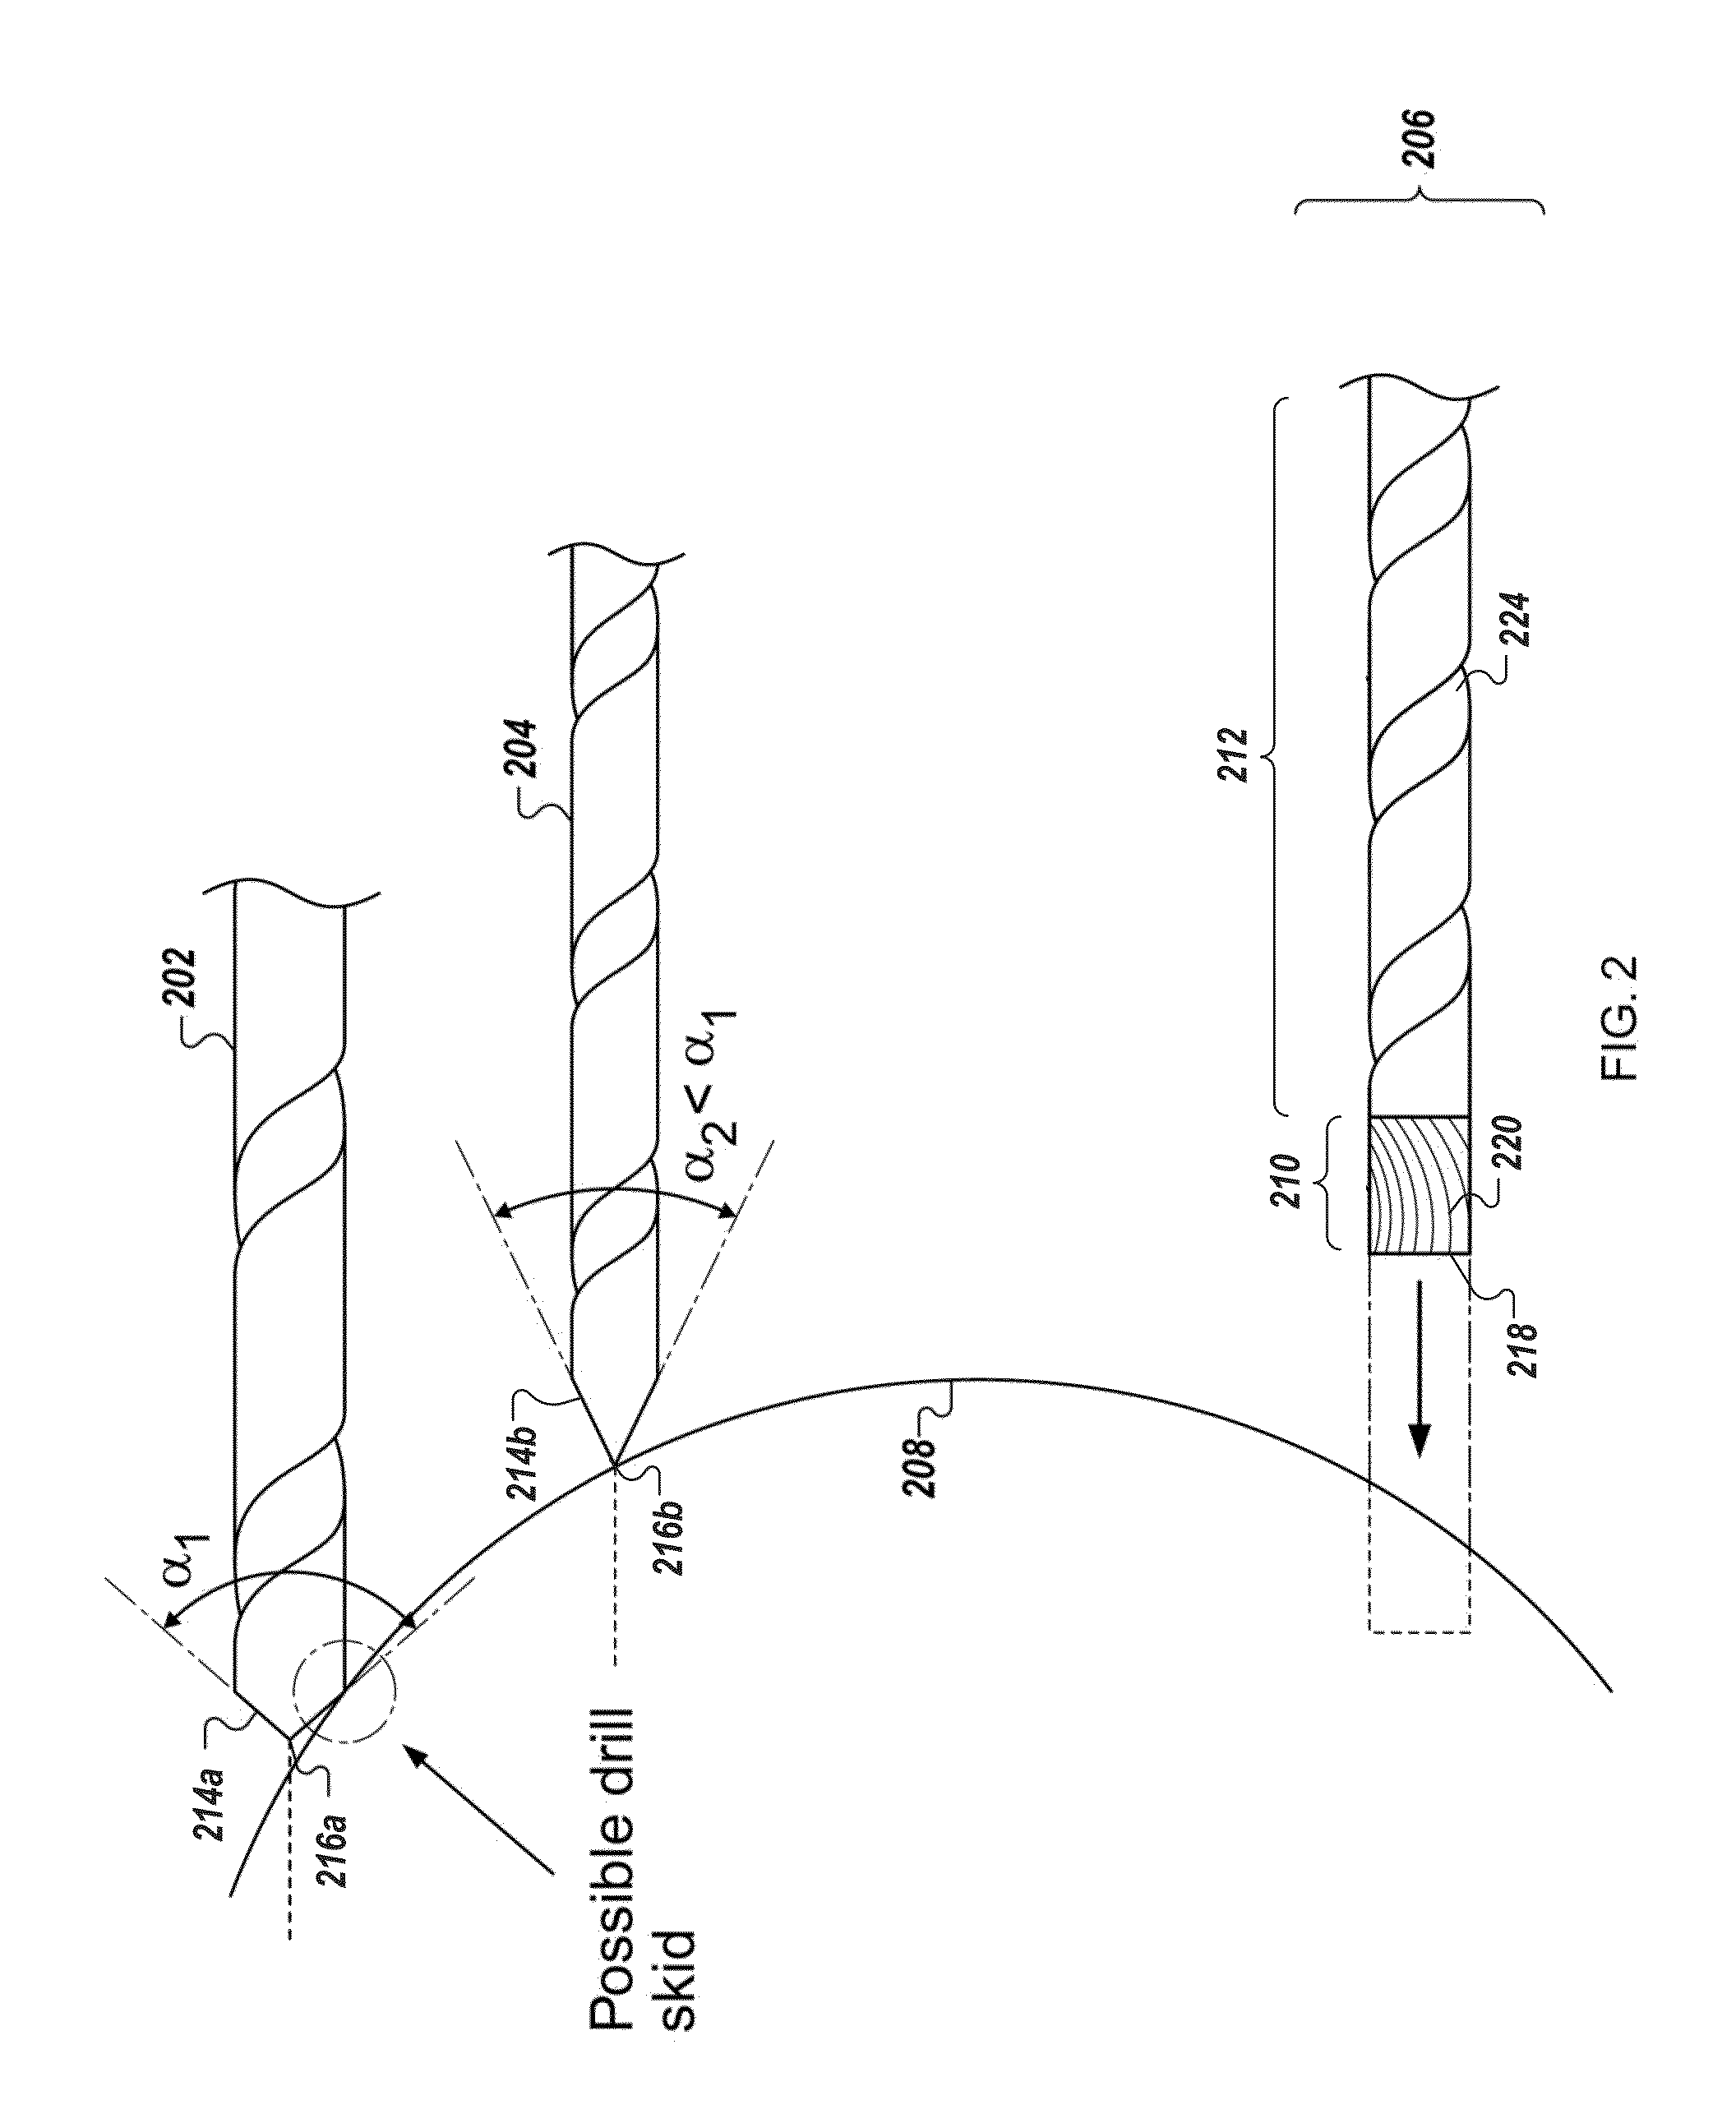 Anti-skid surgical instrument for use in preparing holes in bone tissue